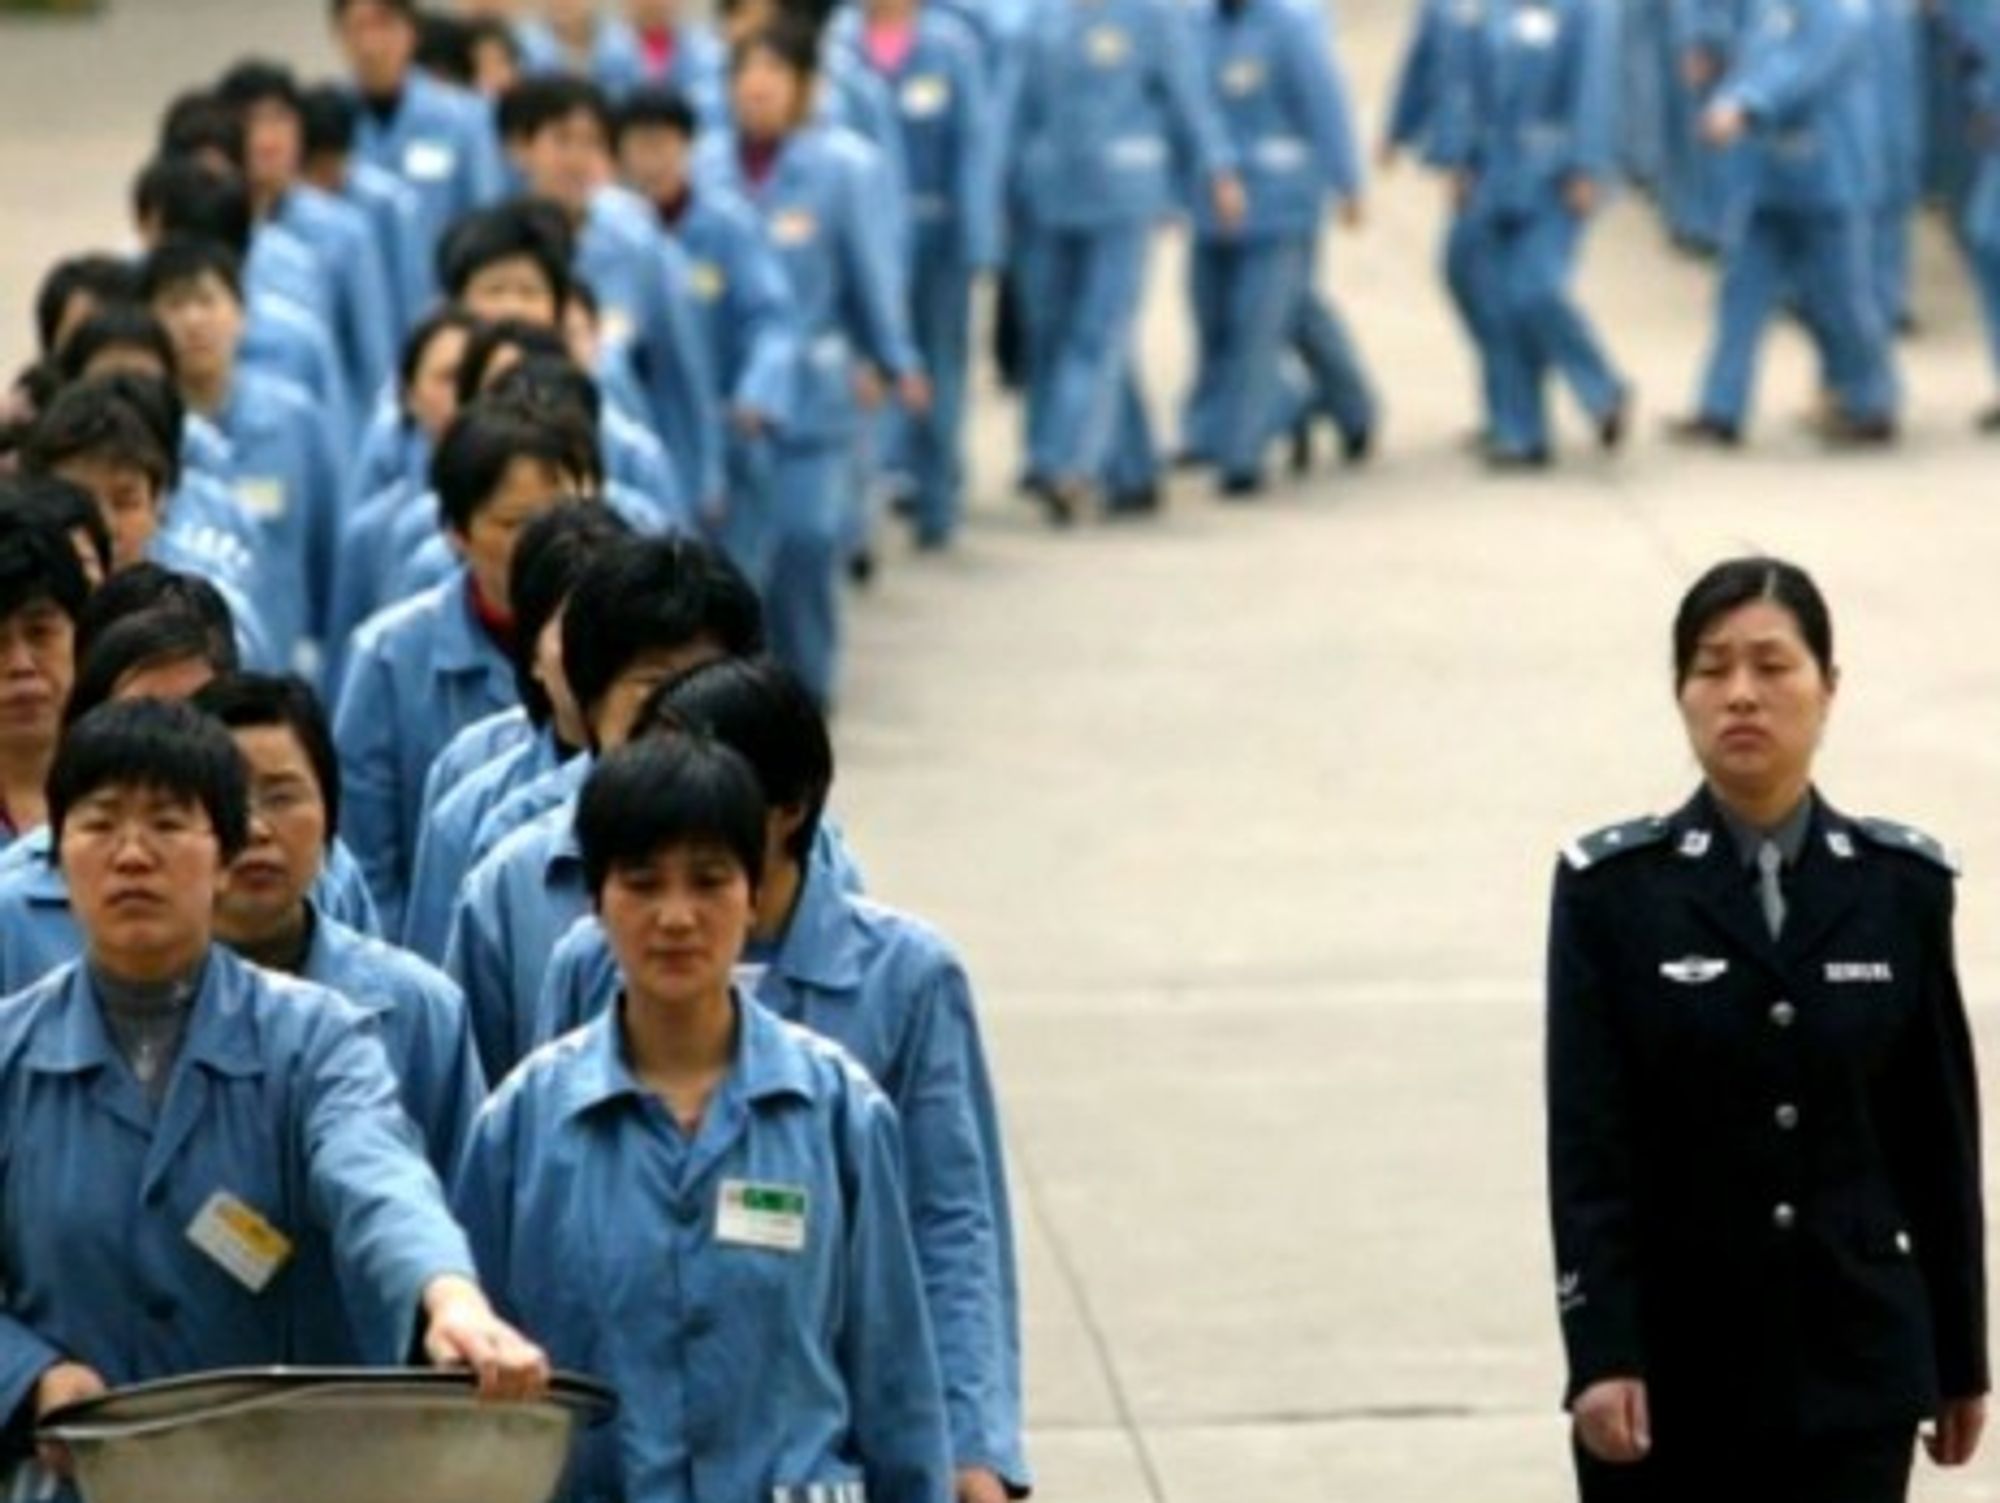 there-are-350-reeducation-through-labor-camps-in-china.jpg